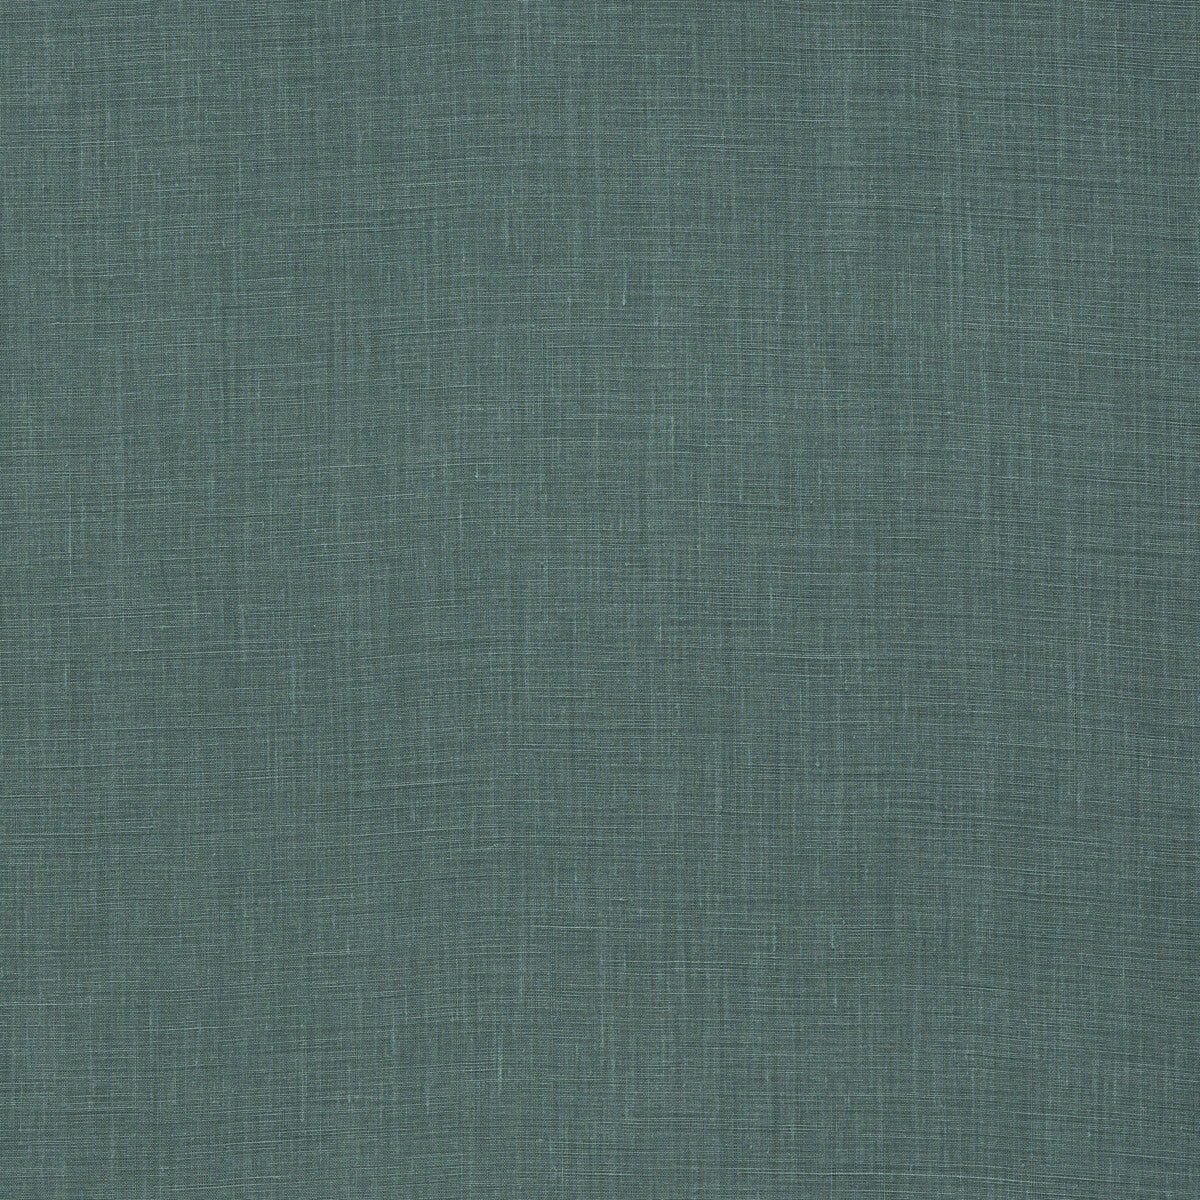 Baker House Linen fabric in emerald color - pattern BF10961.785.0 - by G P &amp; J Baker in the Baker House Linens collection